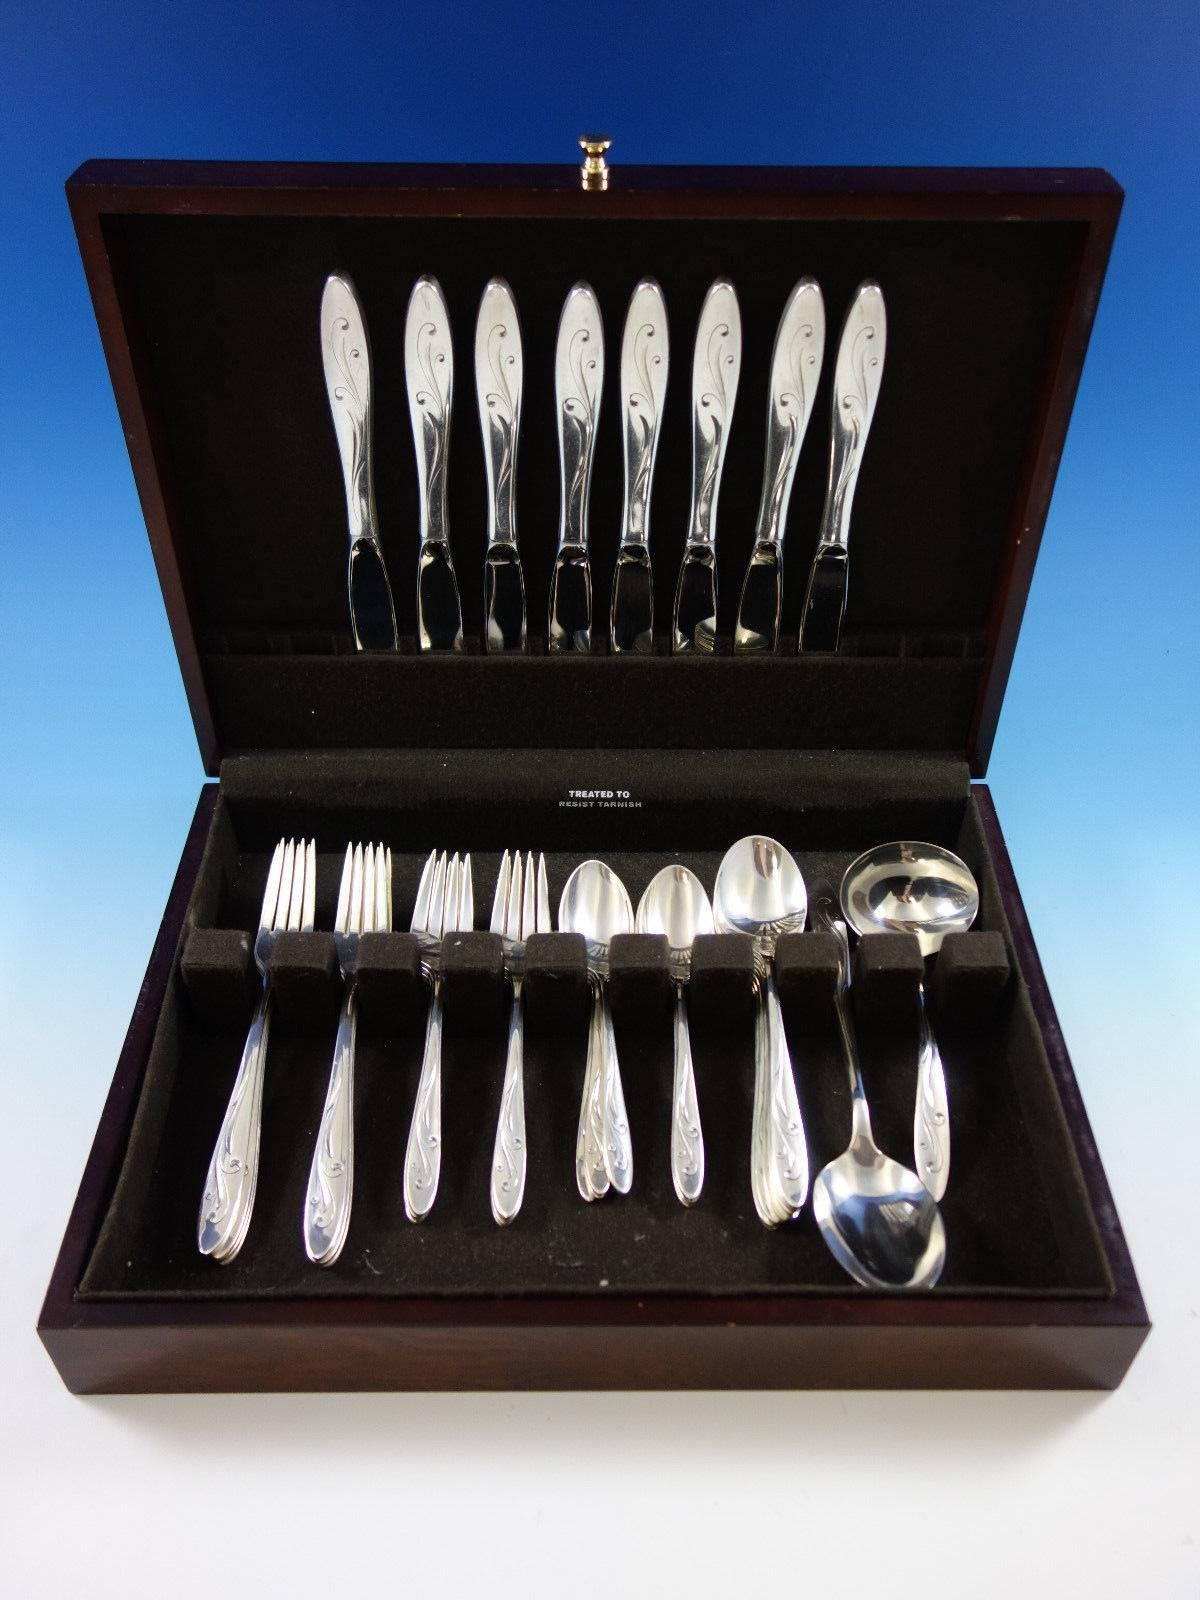 Awakening by Towle sterling silver flatware set of 42 pieces. This set includes: 
Eight knives, 8 3/4